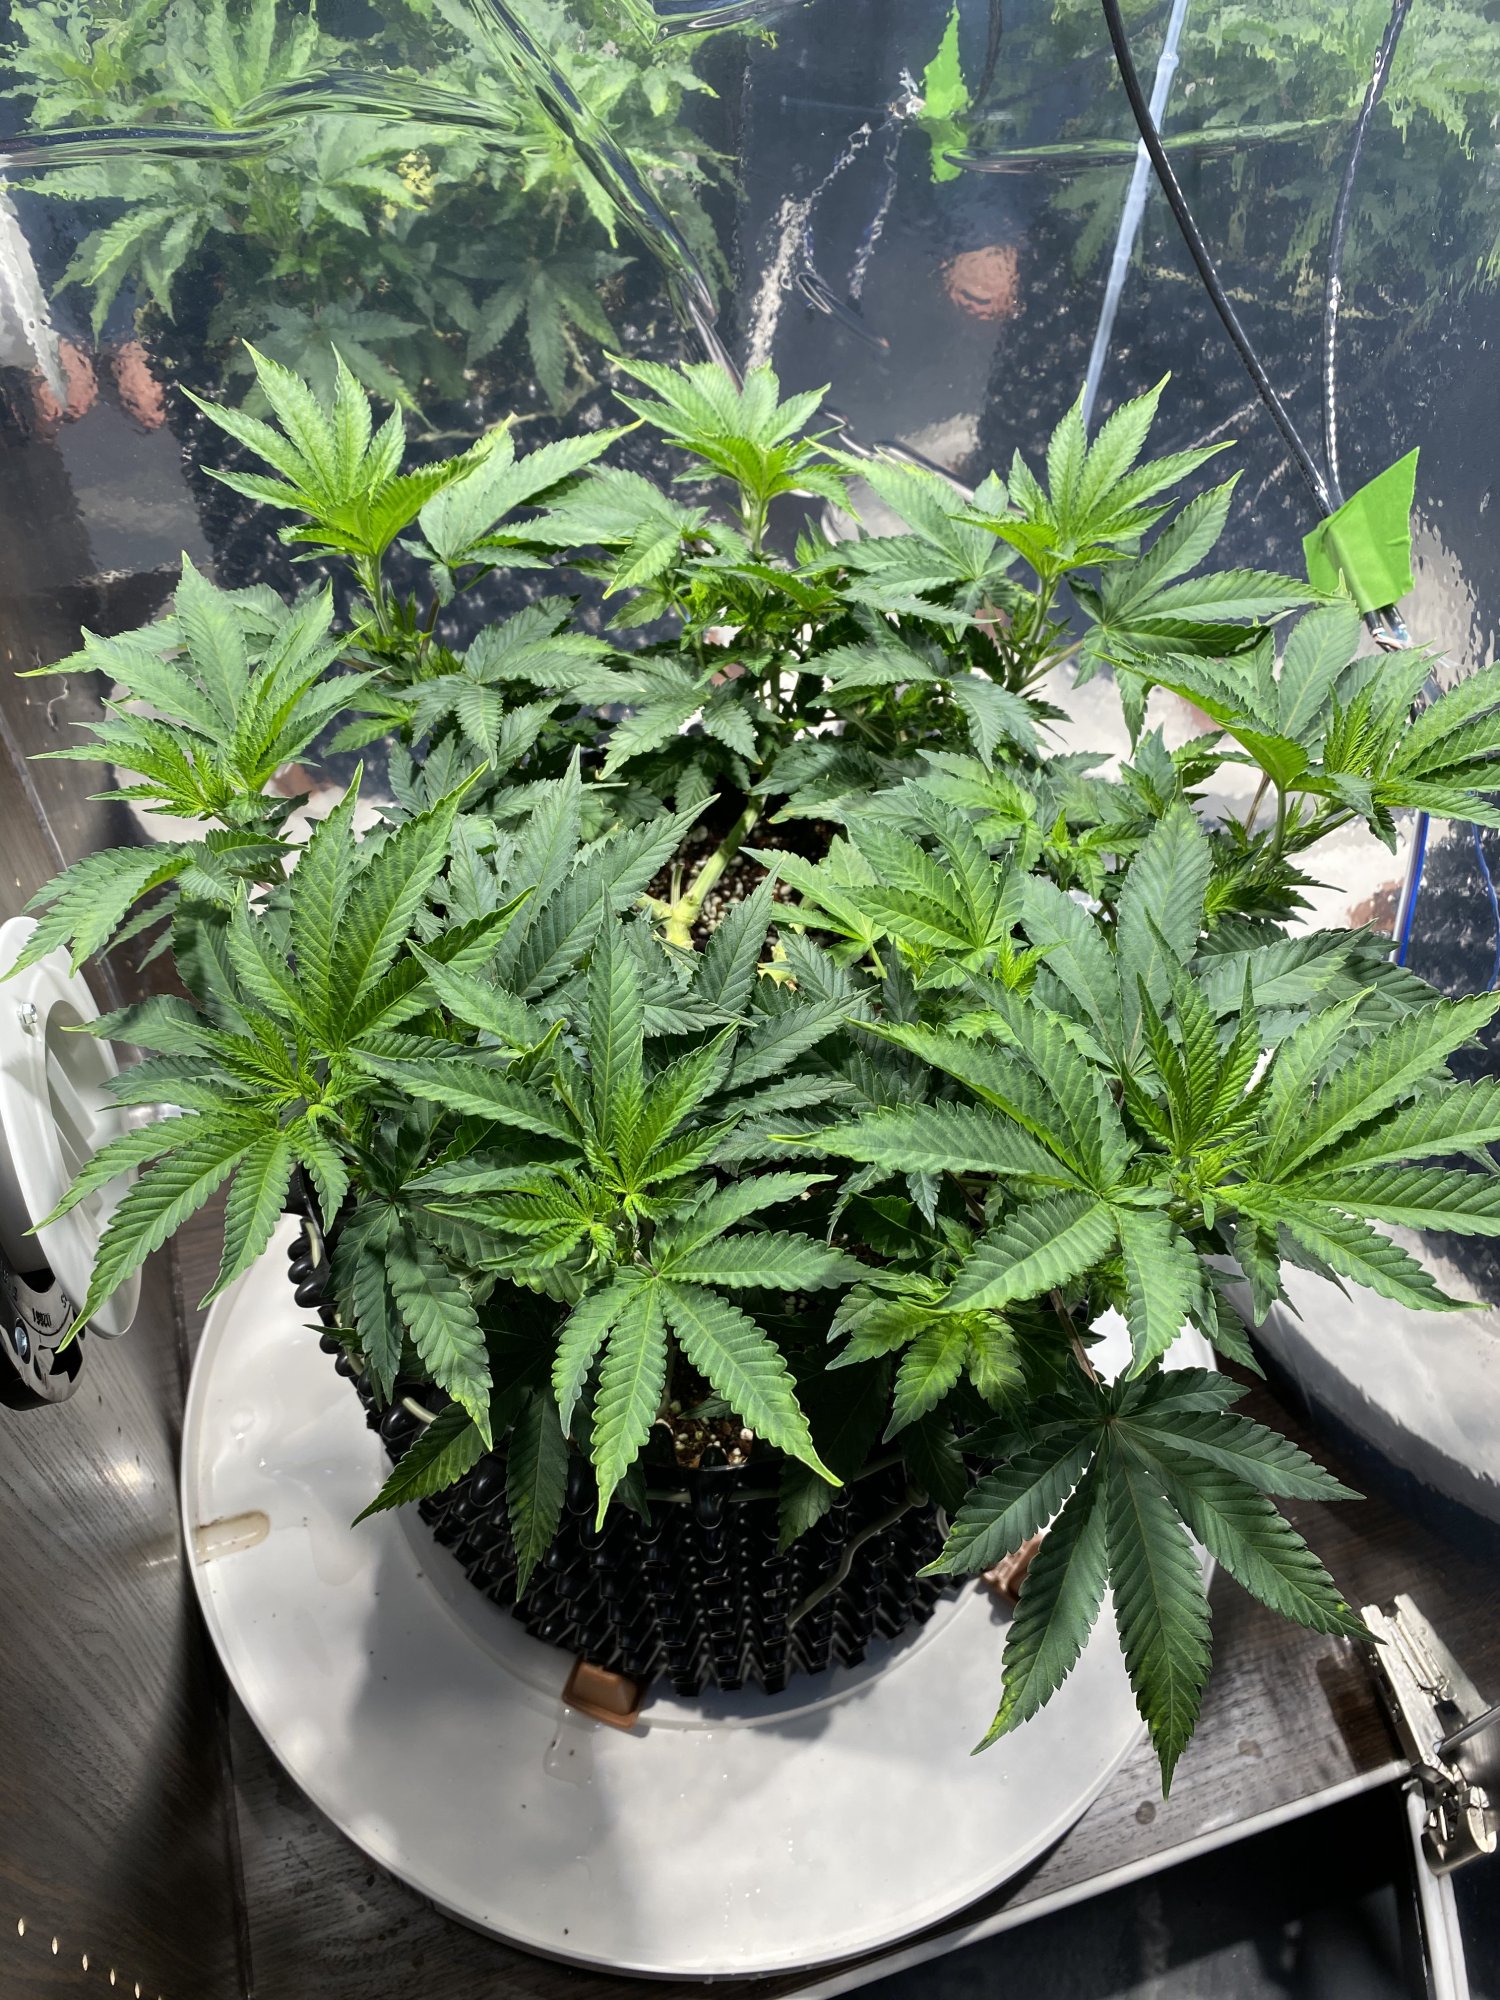 8 manifold   should i trim more foliage or let it grow  just flipped to flower day 2 2